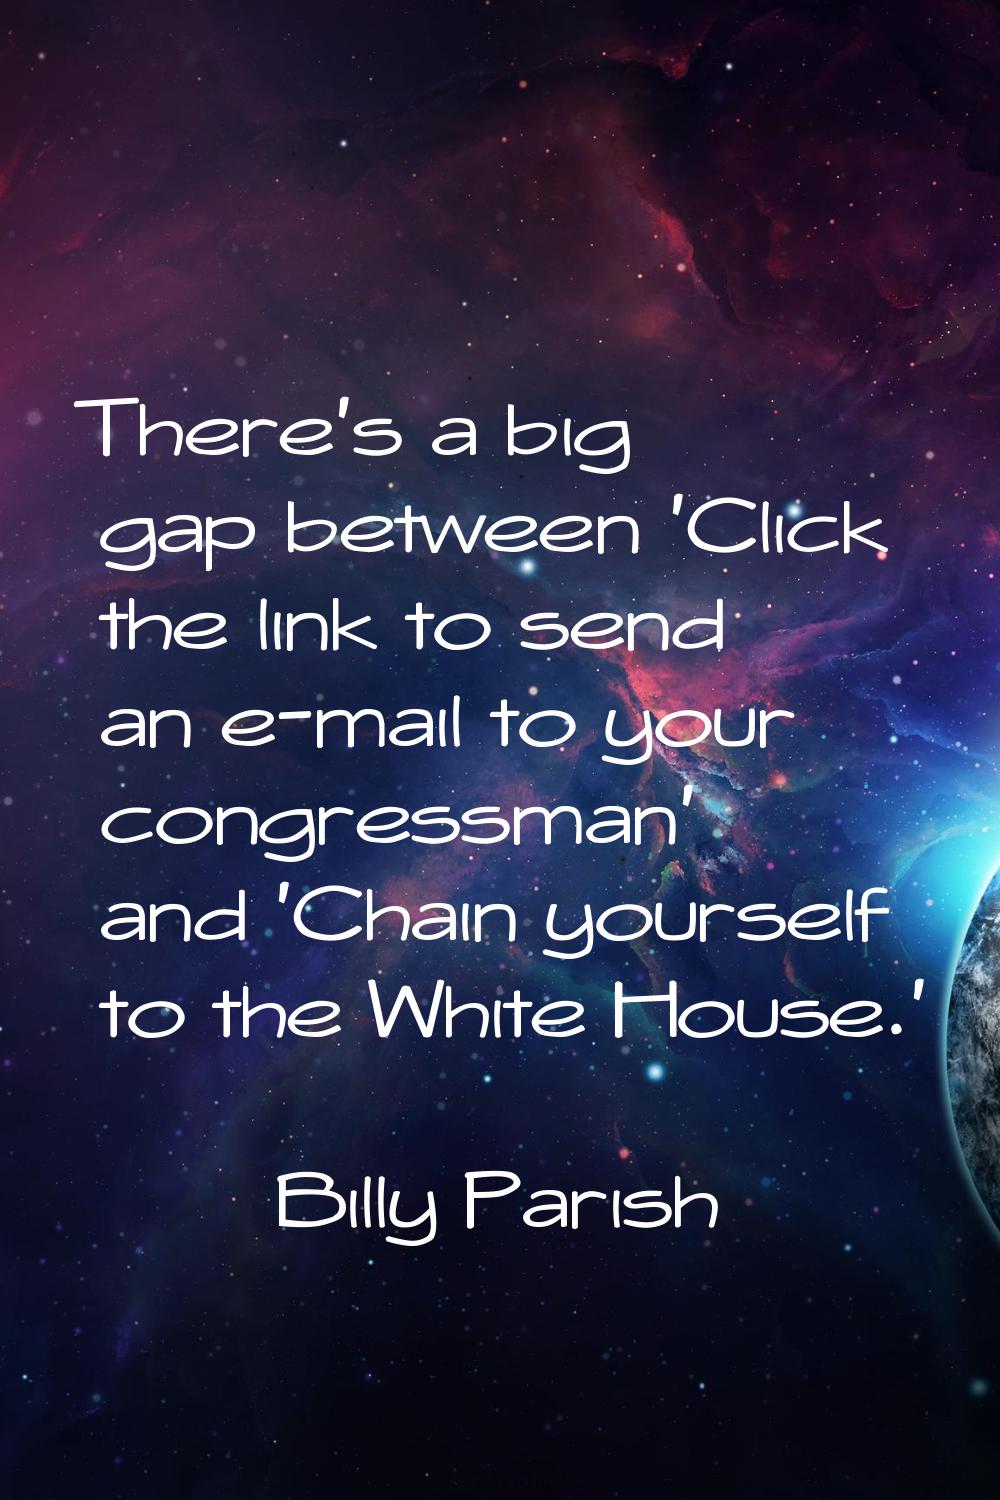 There's a big gap between 'Click the link to send an e-mail to your congressman' and 'Chain yoursel